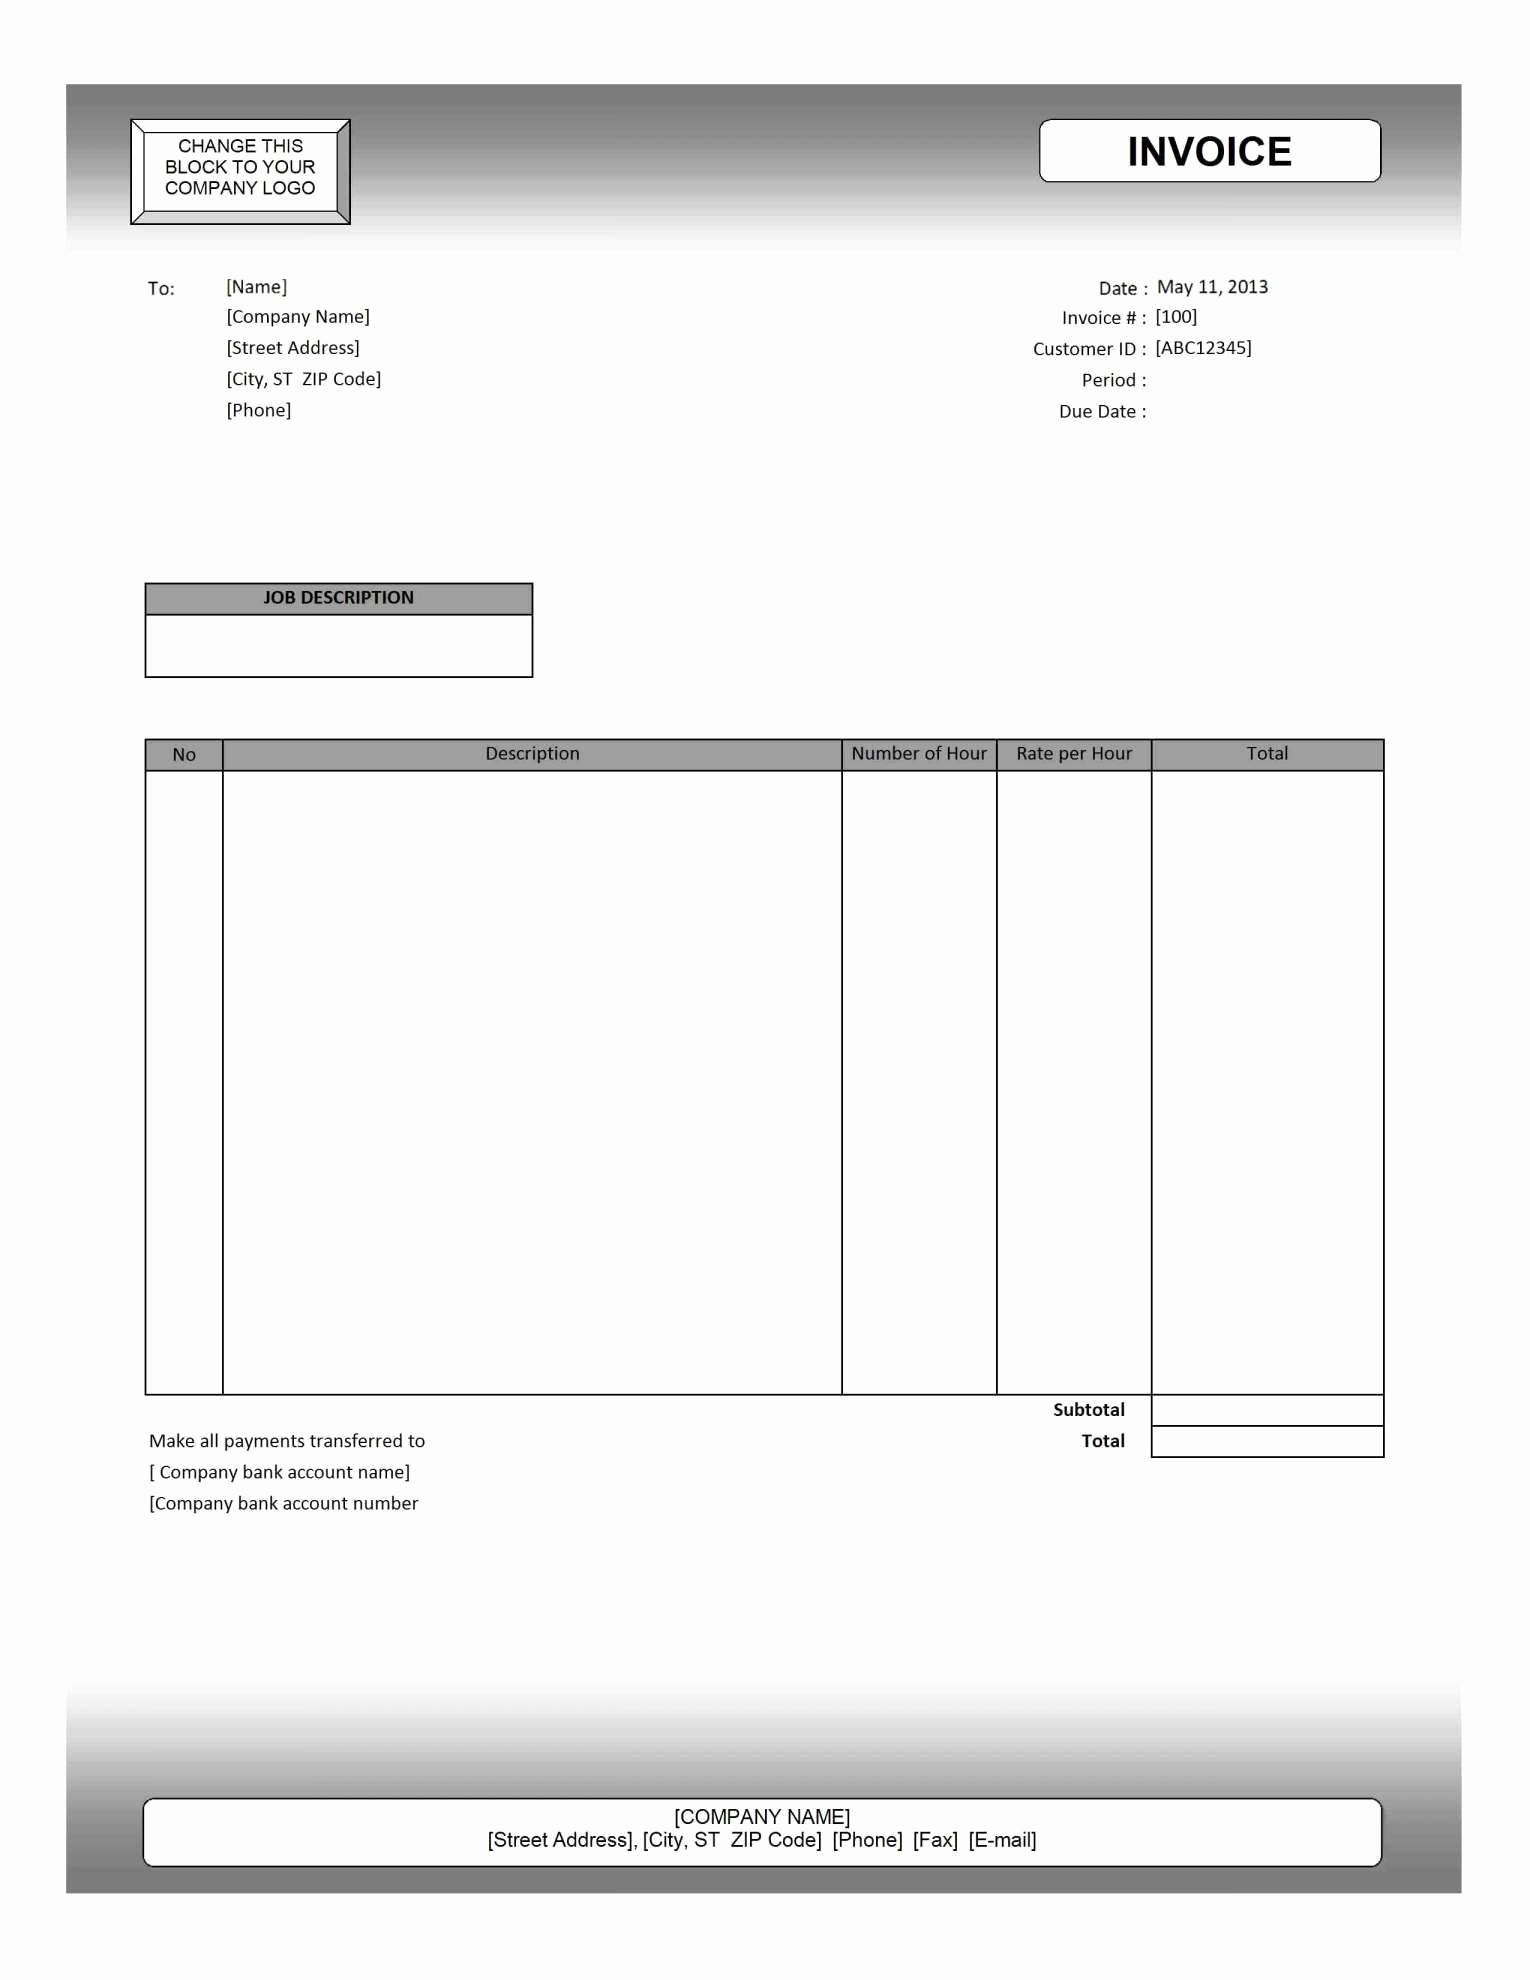 Downloadable Invoice Template for Mac Beautiful Invoice Templates for Mac Expense Spreadshee Invoice